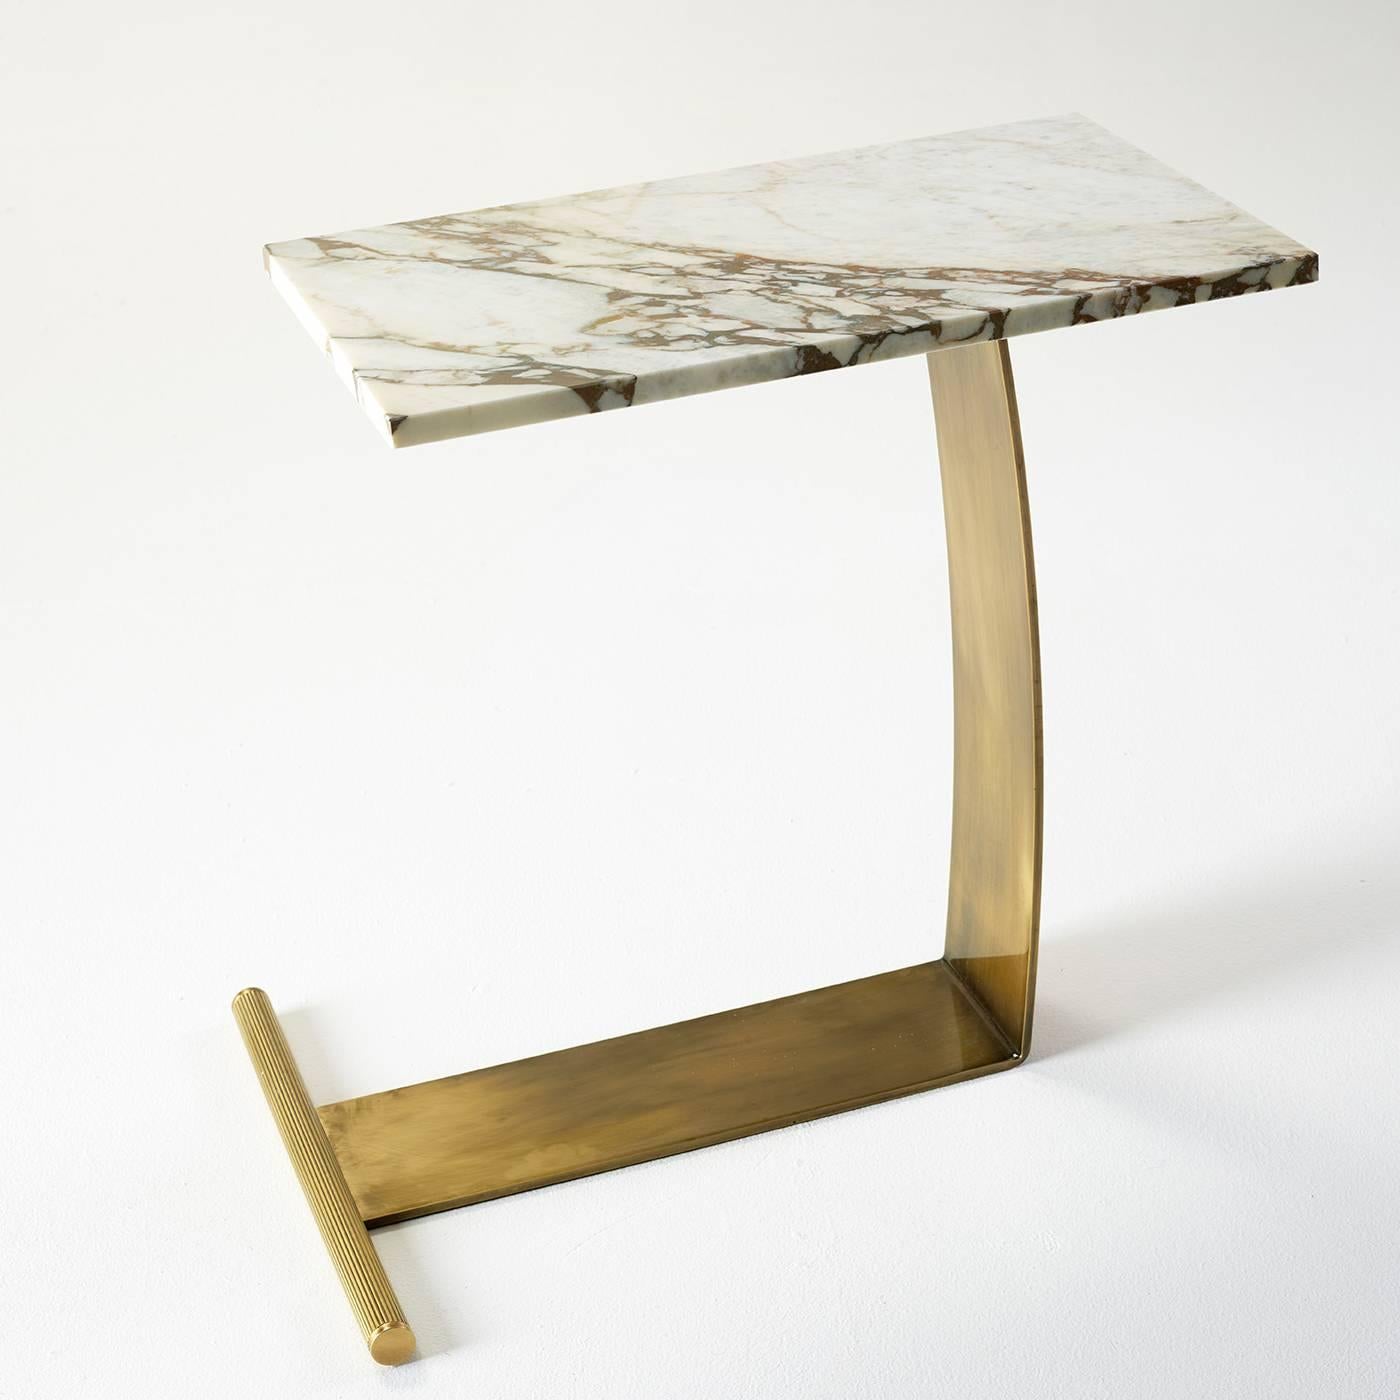 This table is a signature creation of Florentine furniture maker Marioni. The L-shaped brass base supports a lavish white veined marble top.